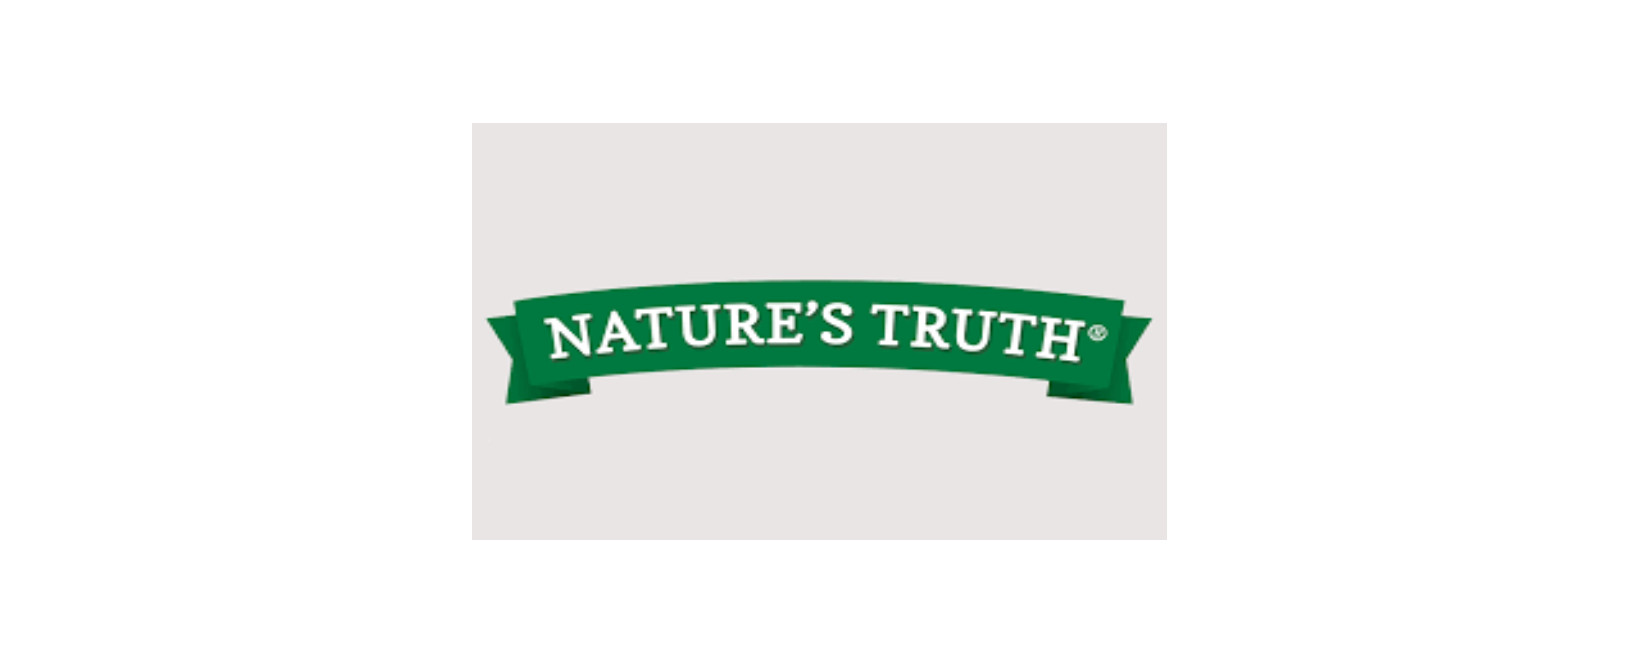 Nature's Truth Discount Code 2022